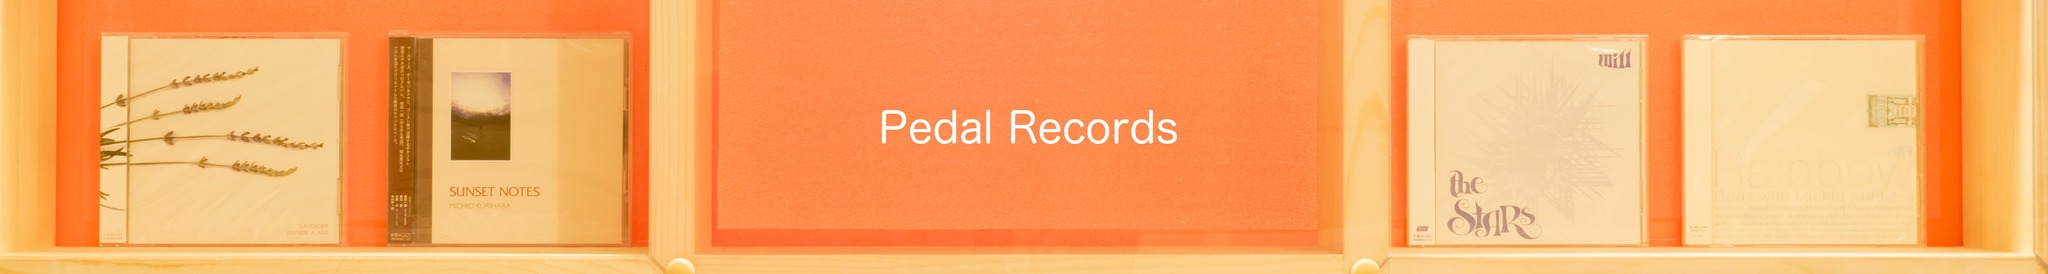 PEDAL RECORDS